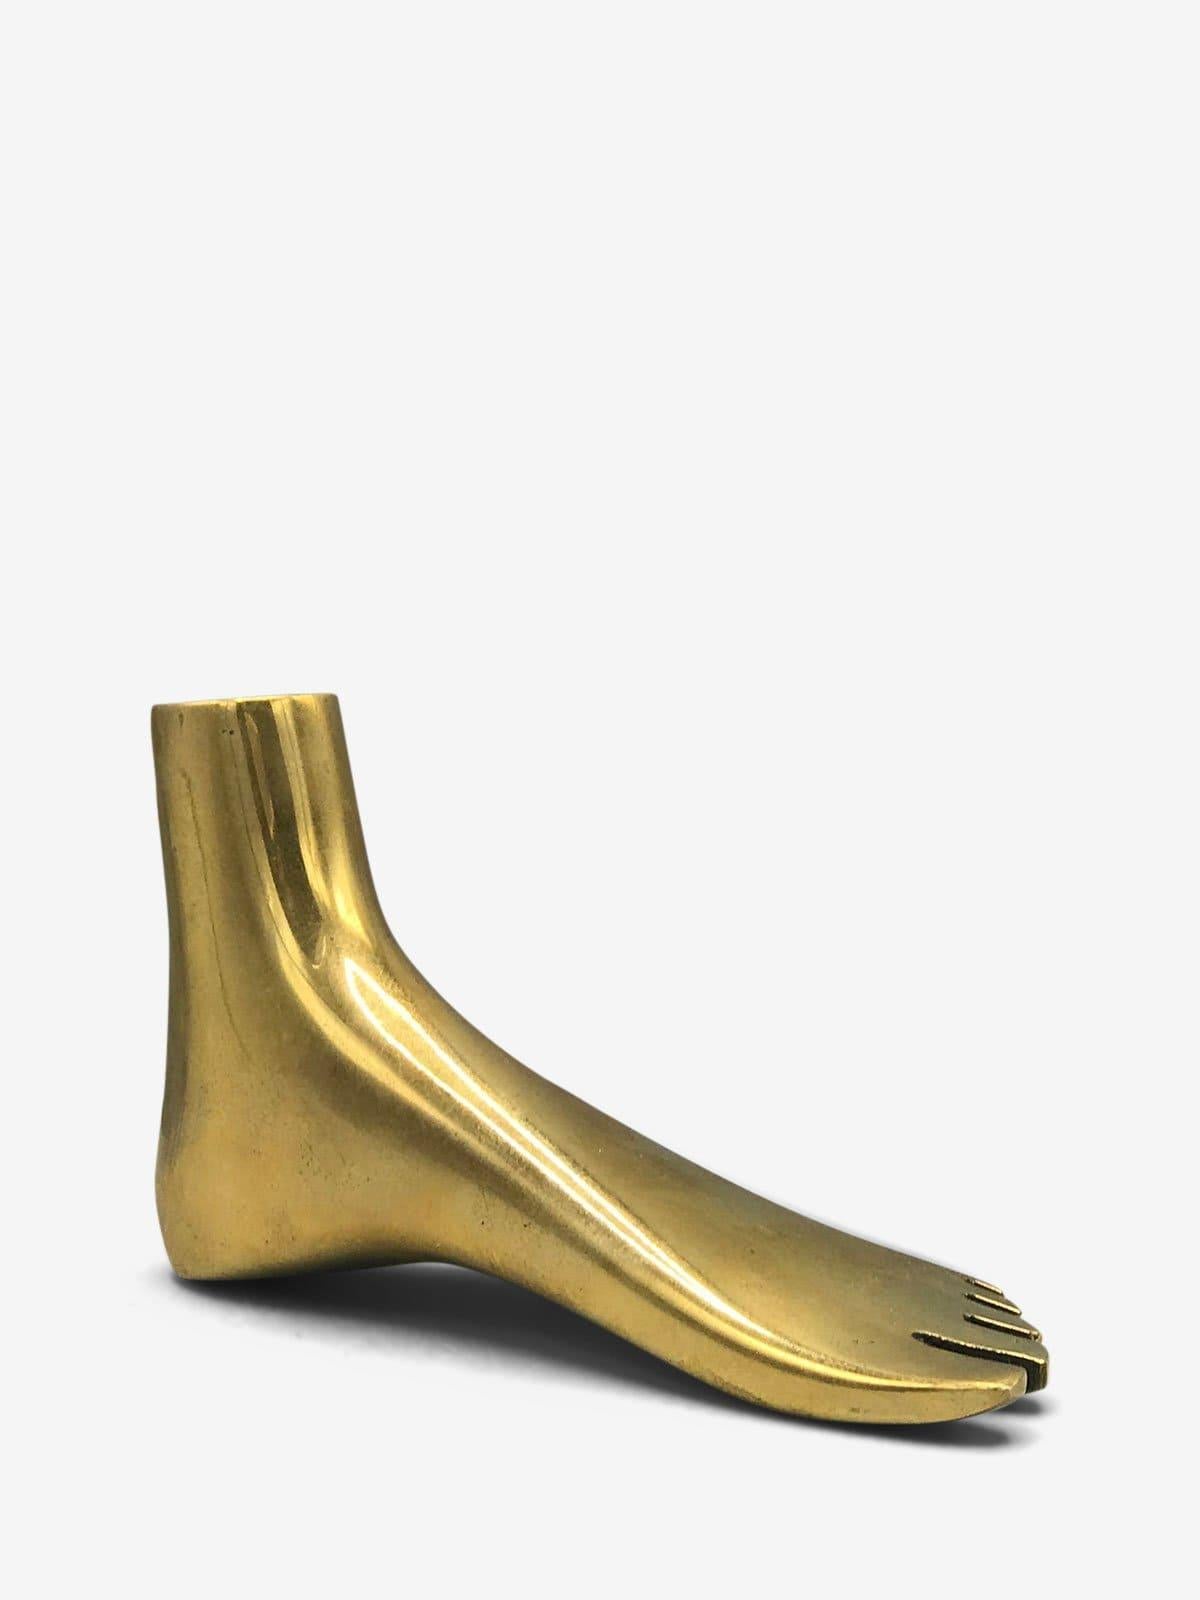 Contemporary Foot Paperweight in Brass by Carl Aubock